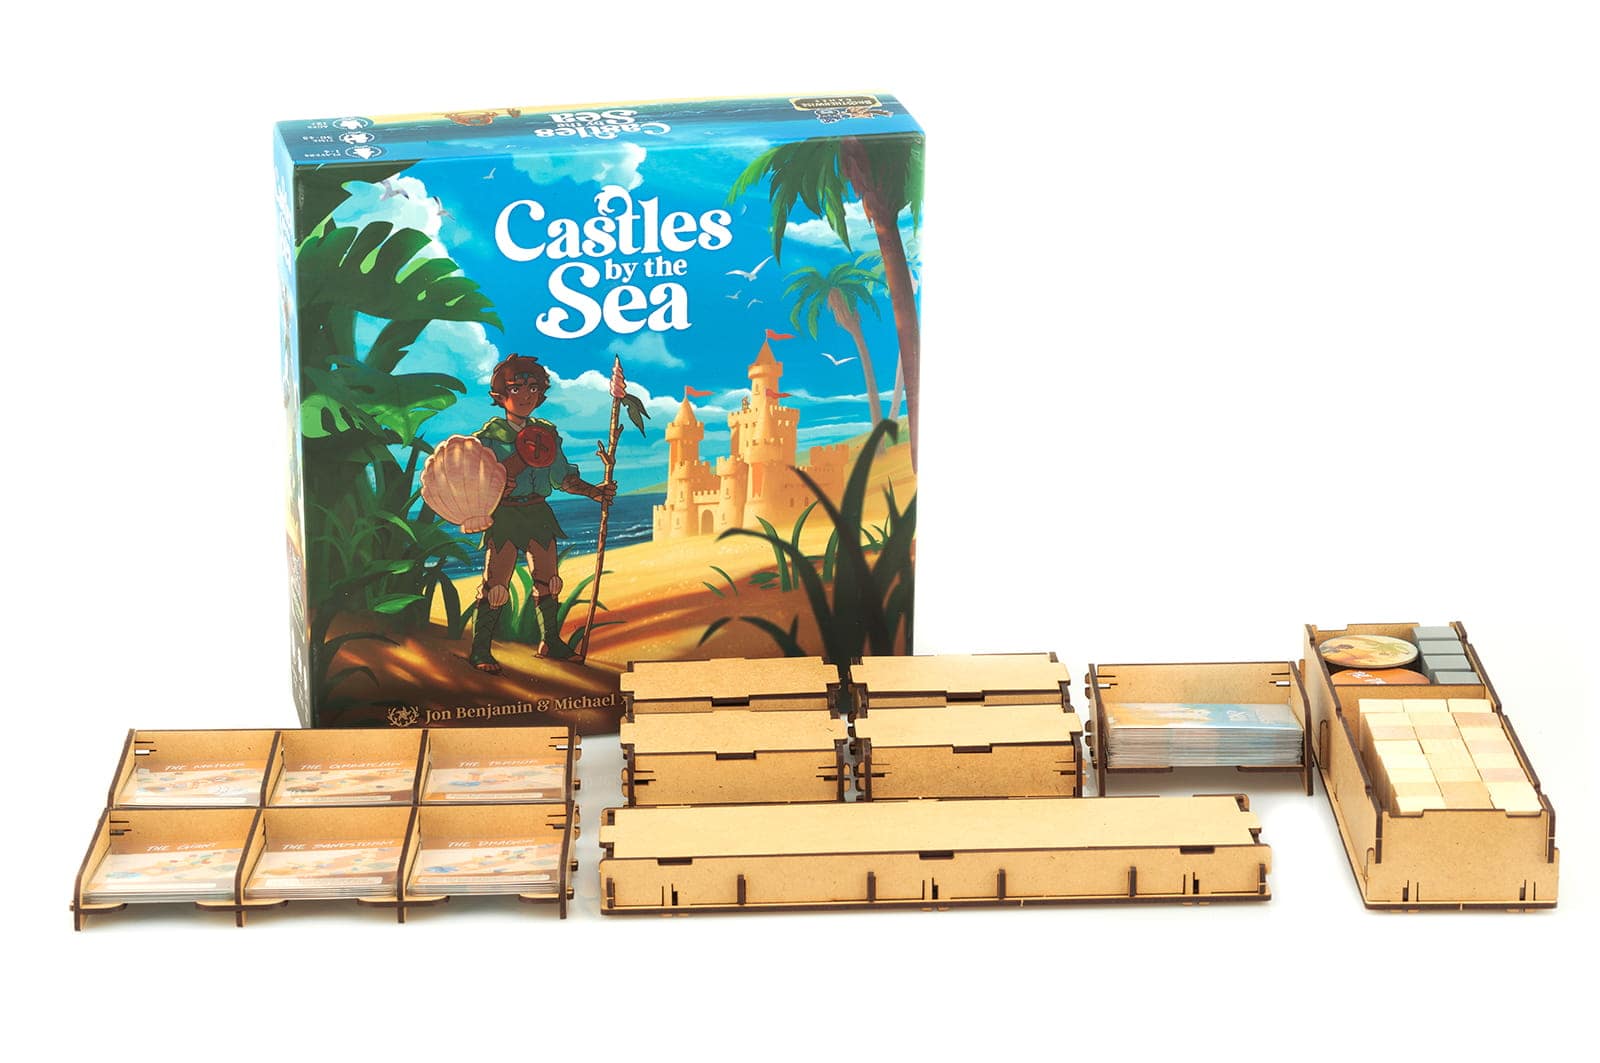 Poland Games Castles by the Sea Insert (ERA89293)